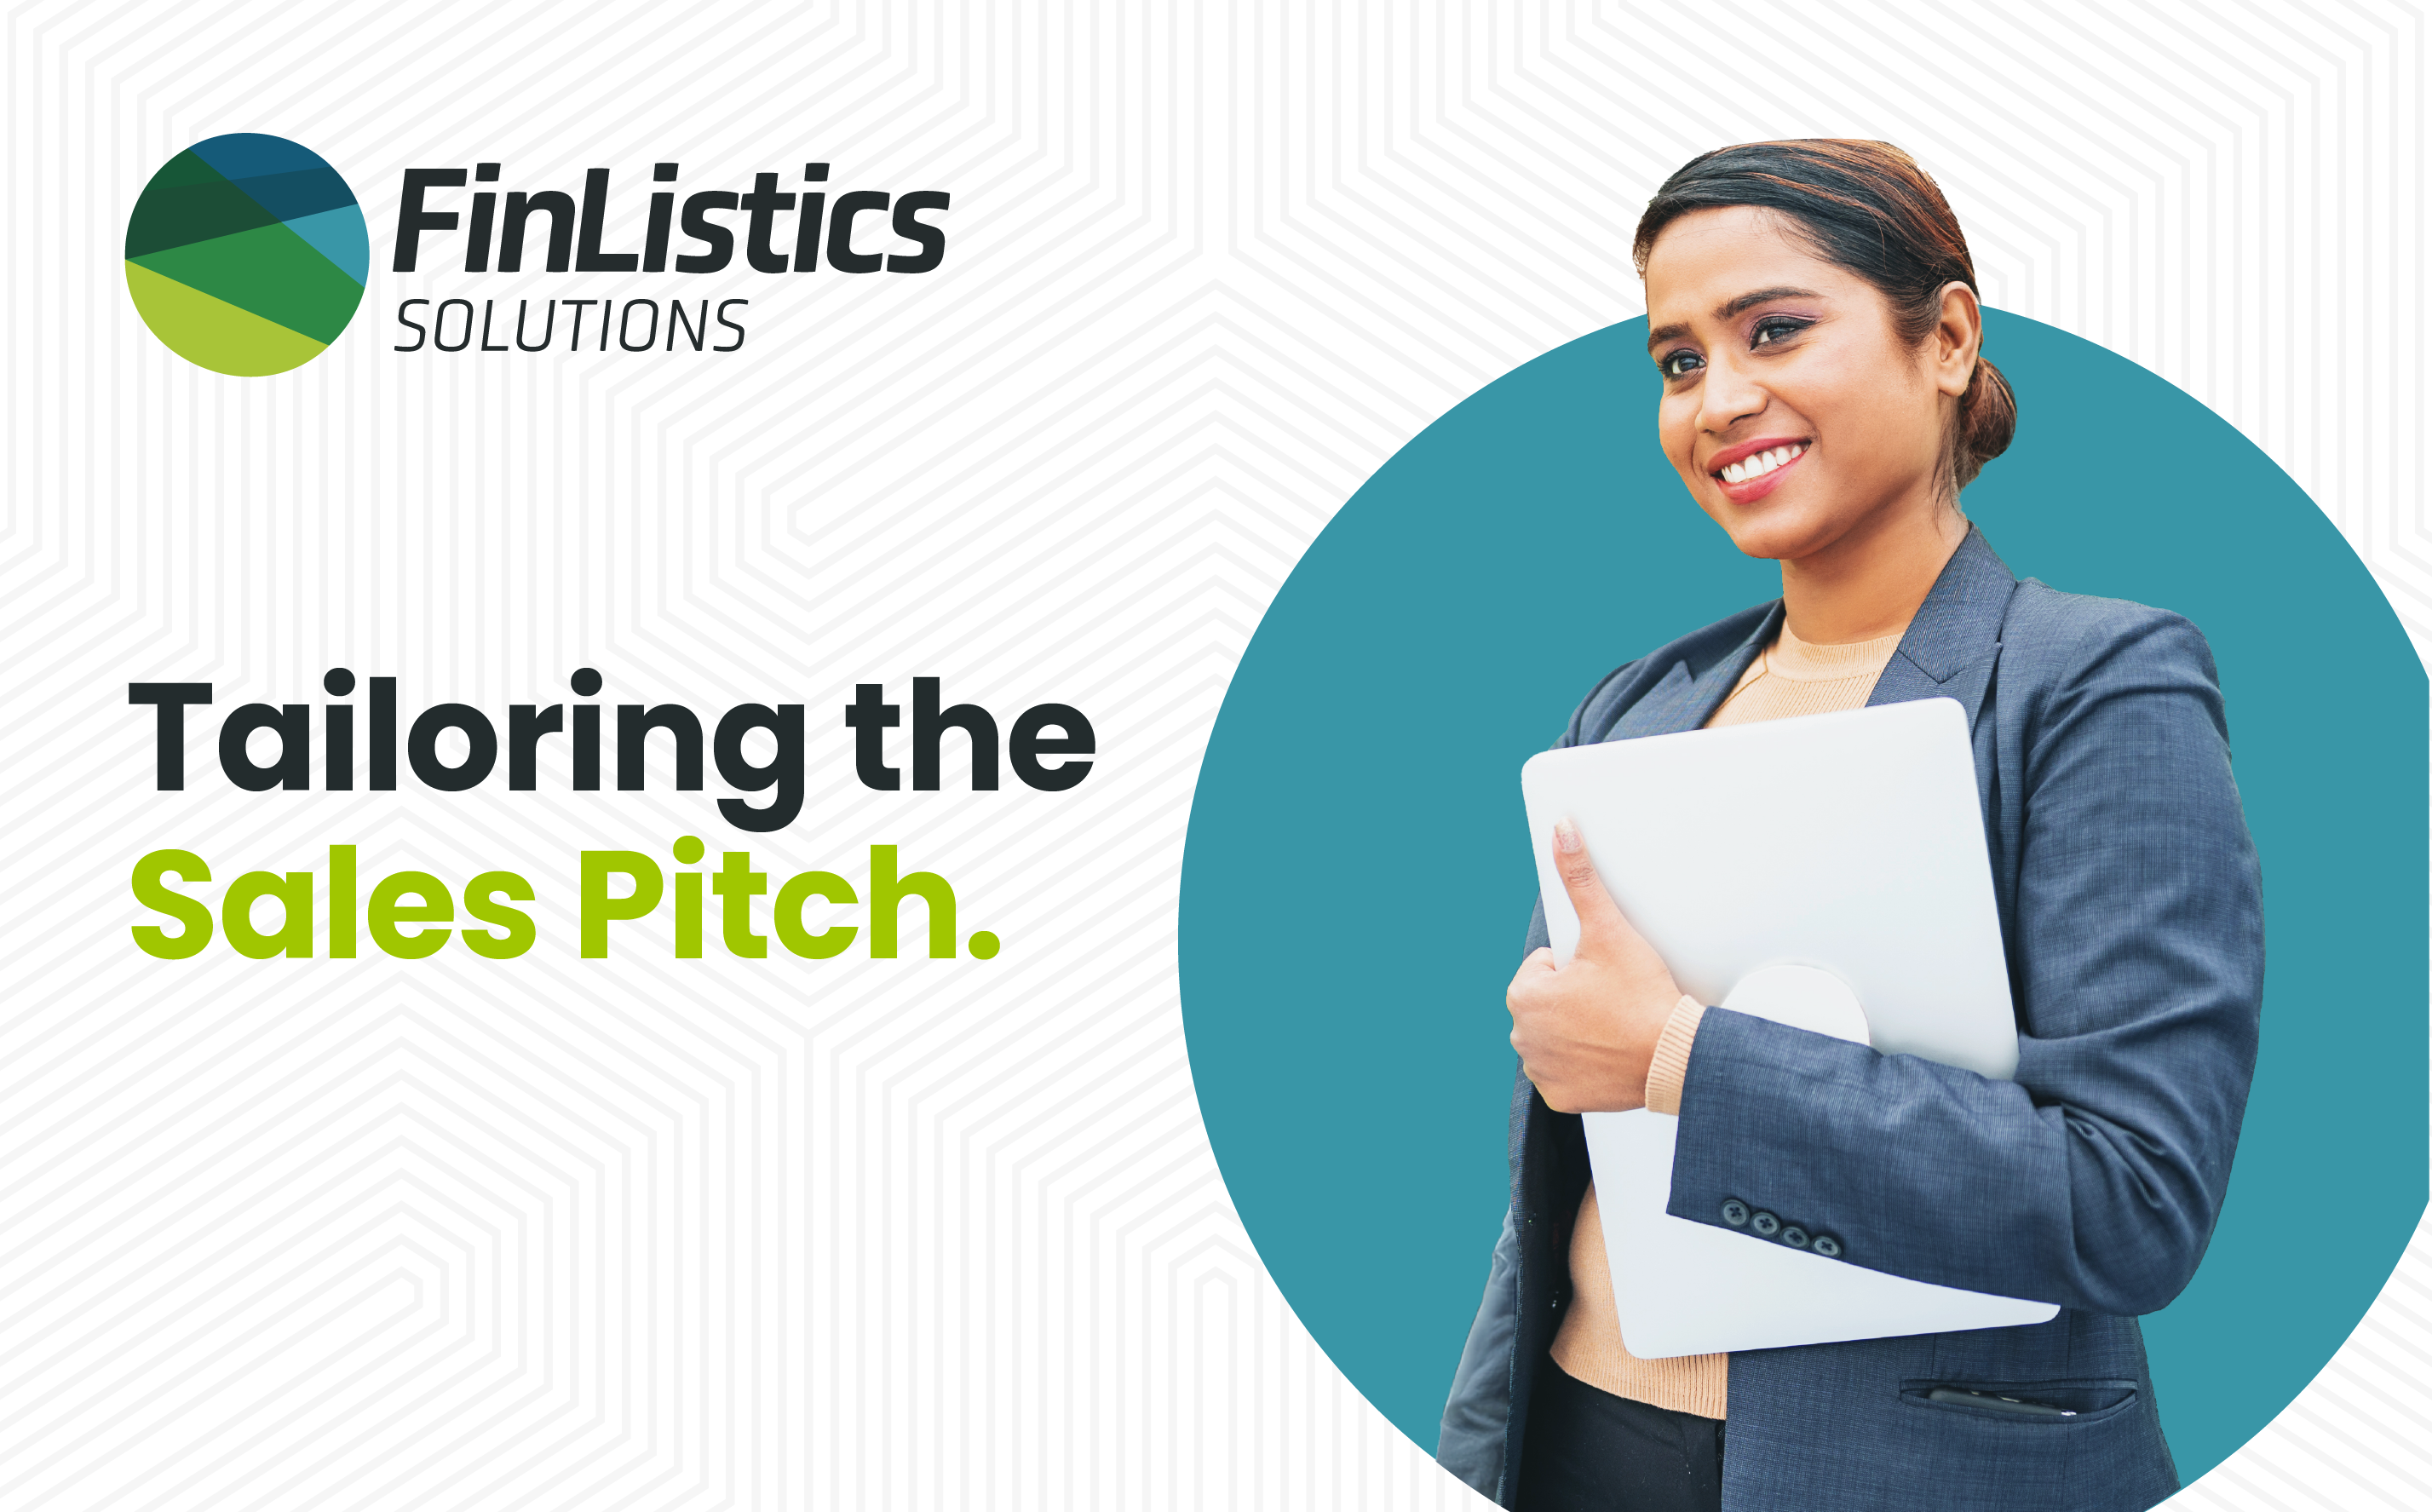 FinListics Solutions. Tailoring the Sales Pitch. A female sales person holds a sleek laptop, ready to take on a new sales process.